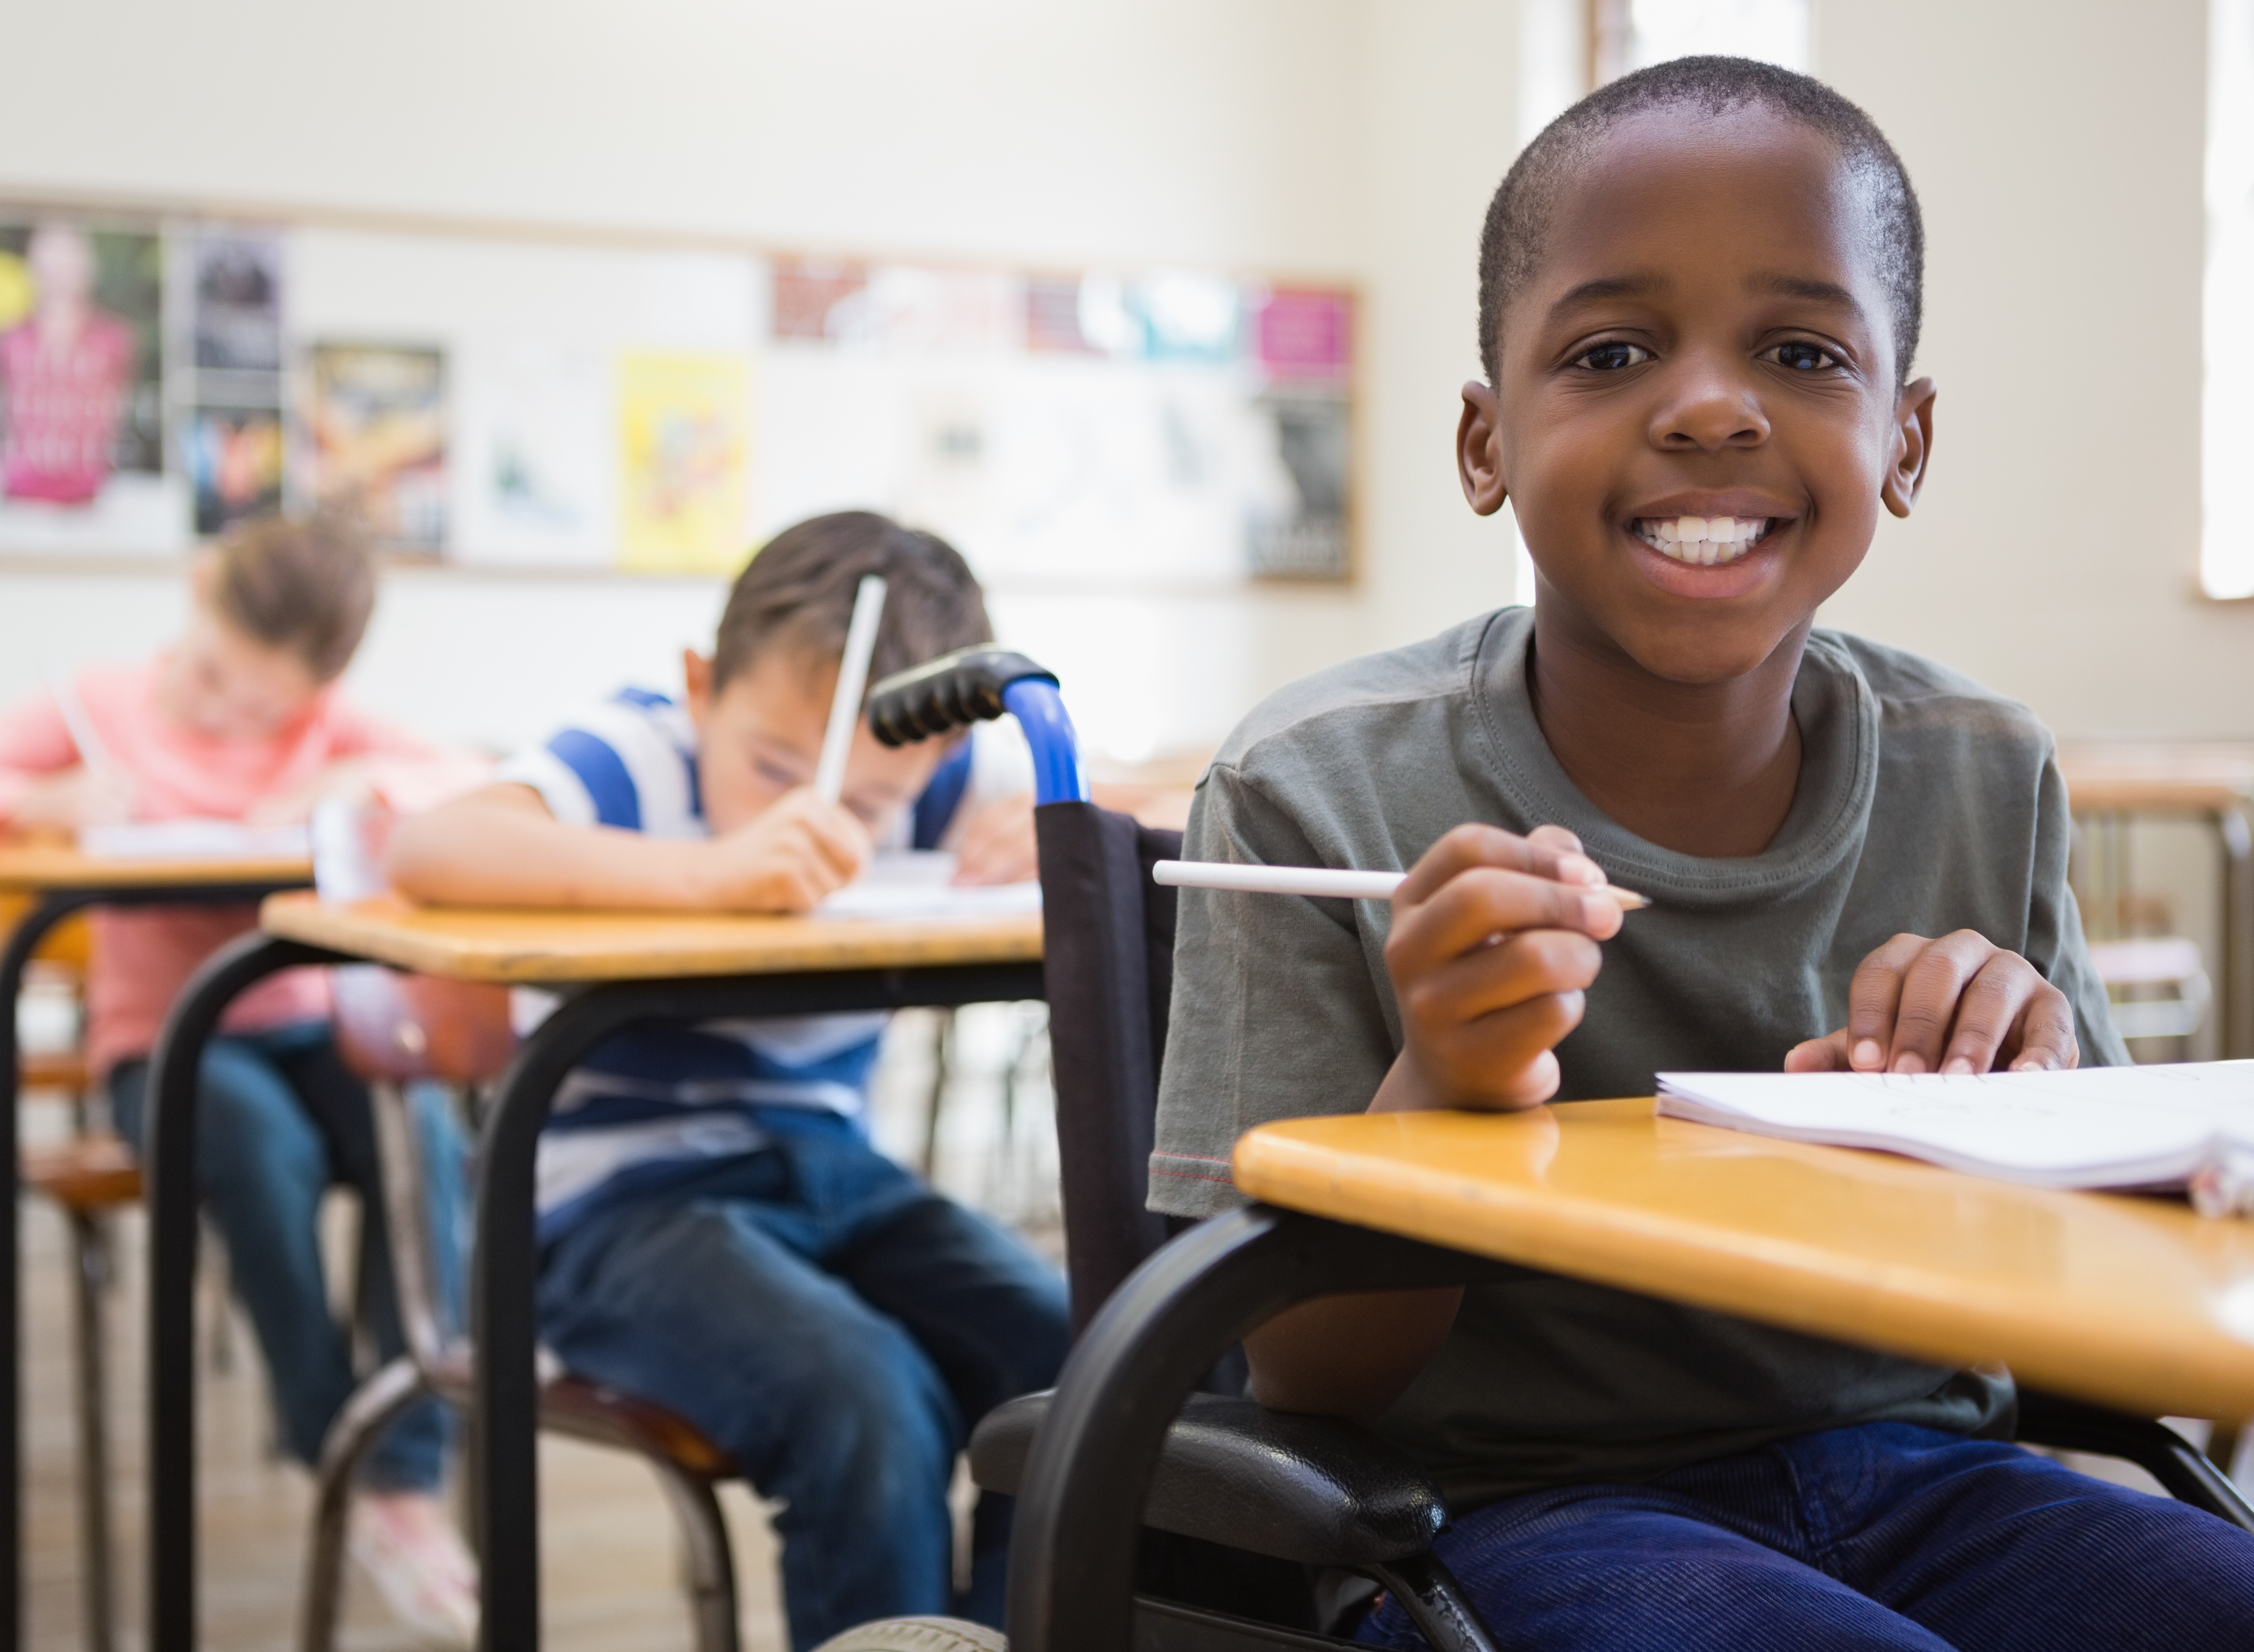 Student in wheelchair smiling in an inclusion classroom